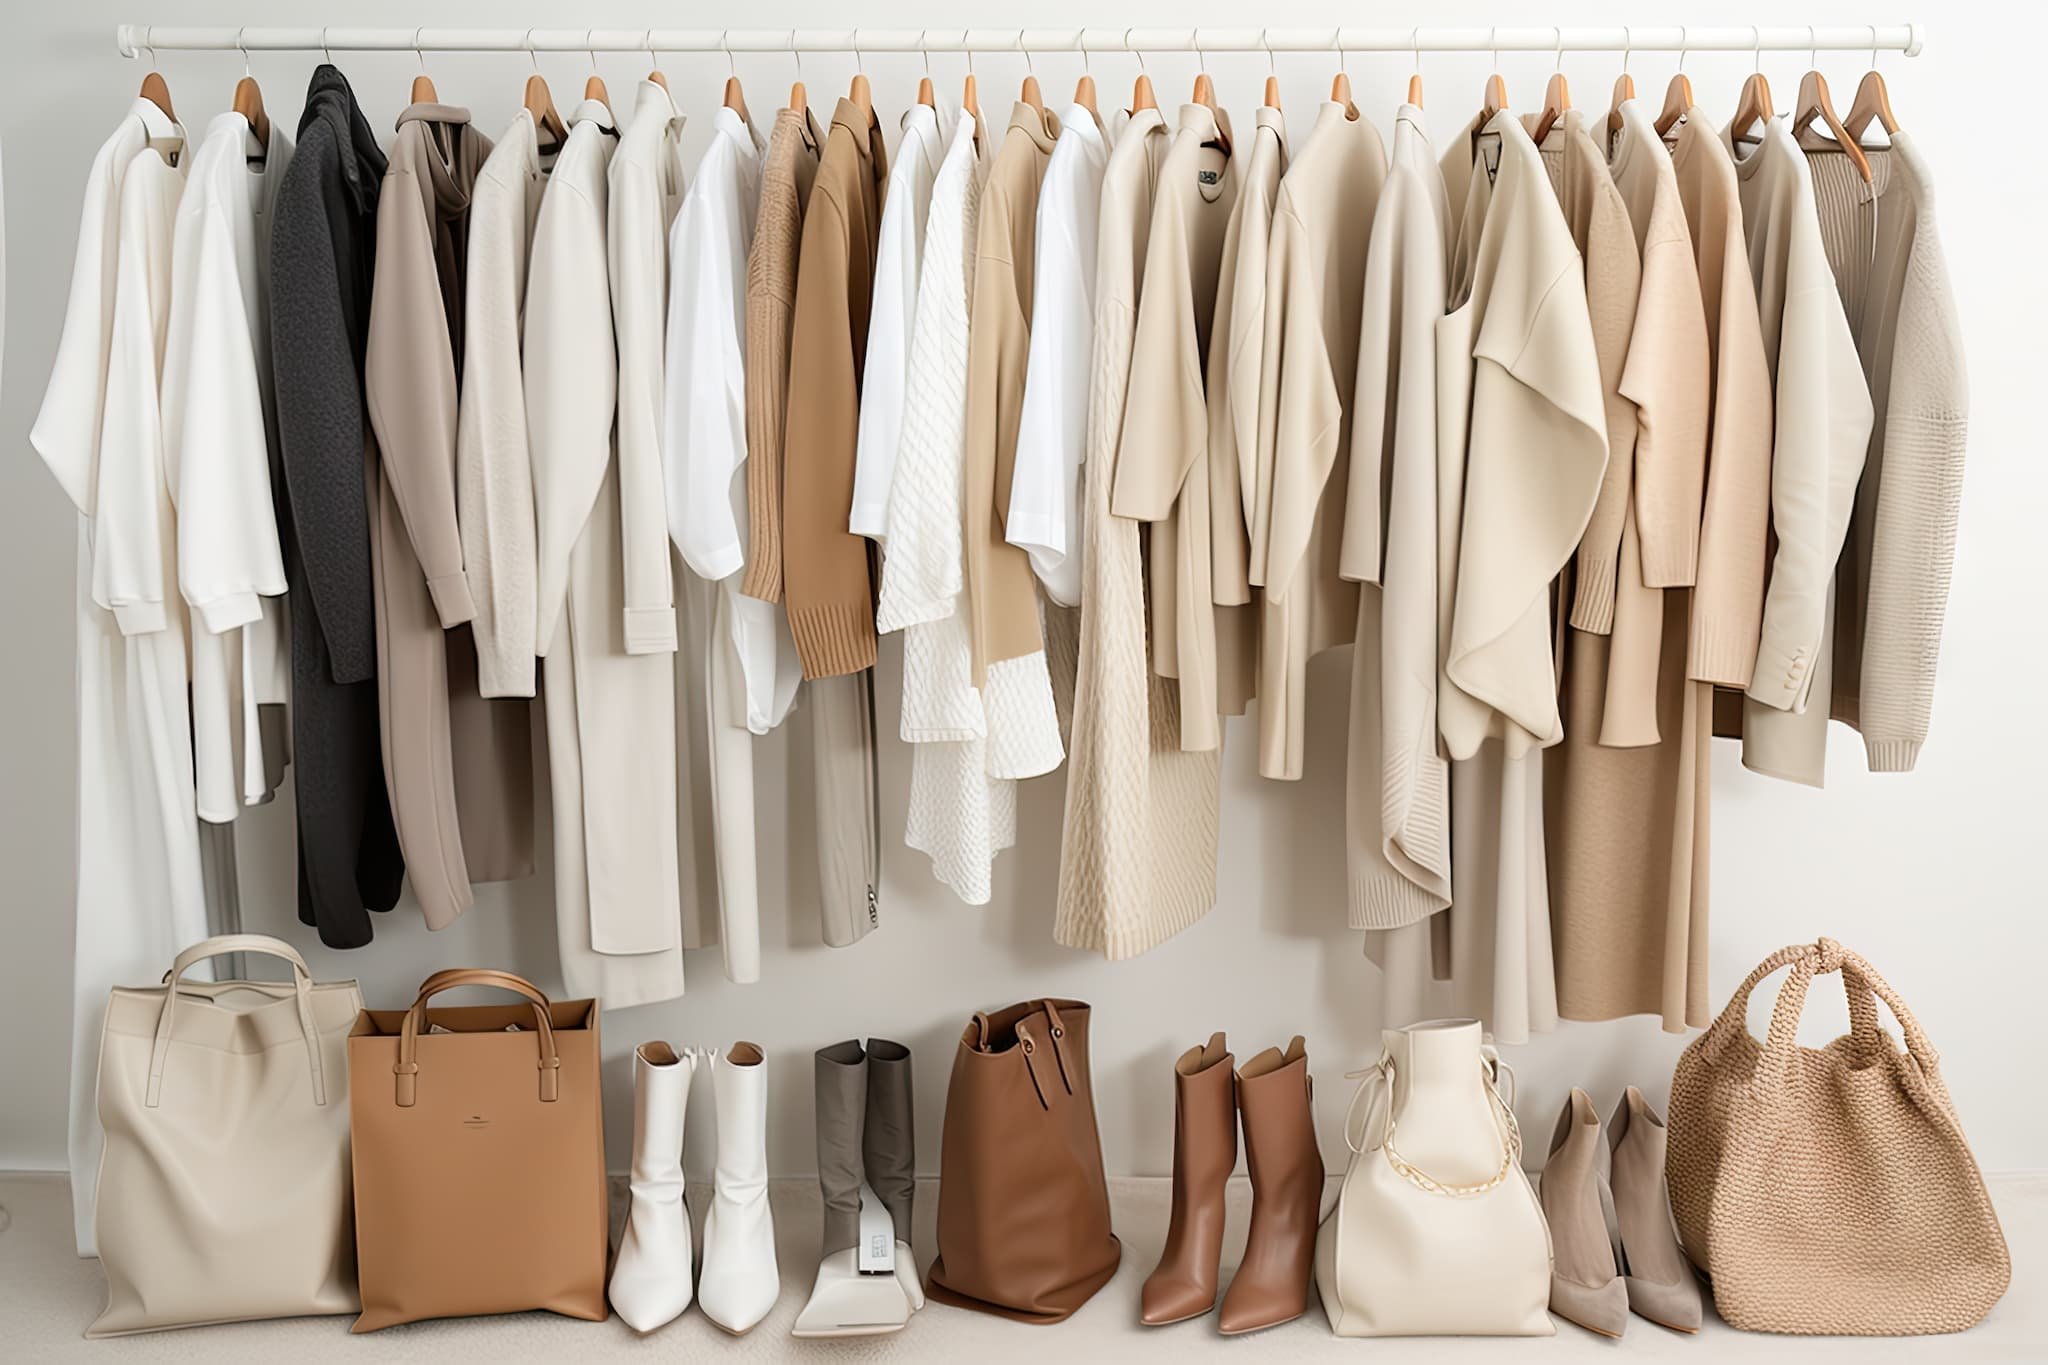 The easiest way to find the perfect outfit